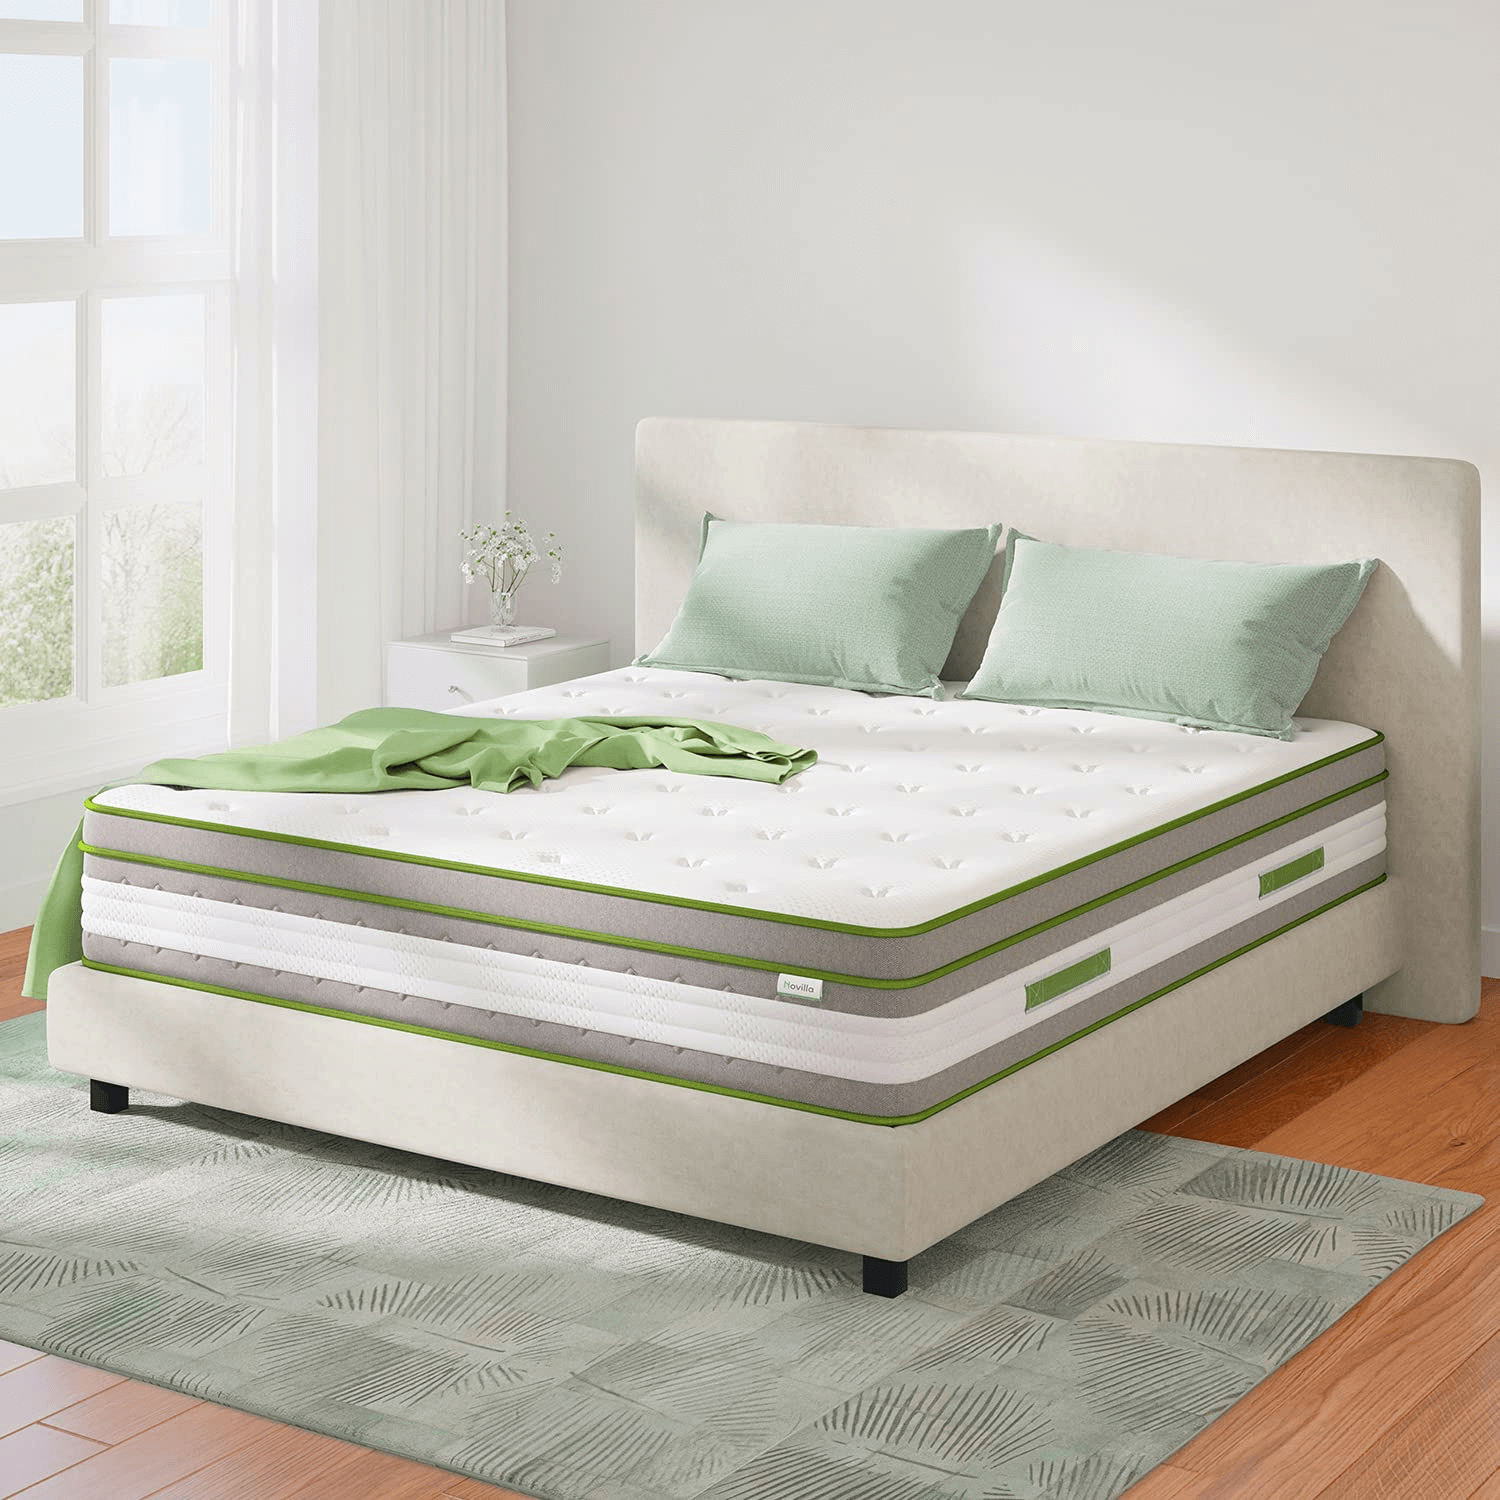 Novilla mattresses have sturdy edge support to ensure users' safe